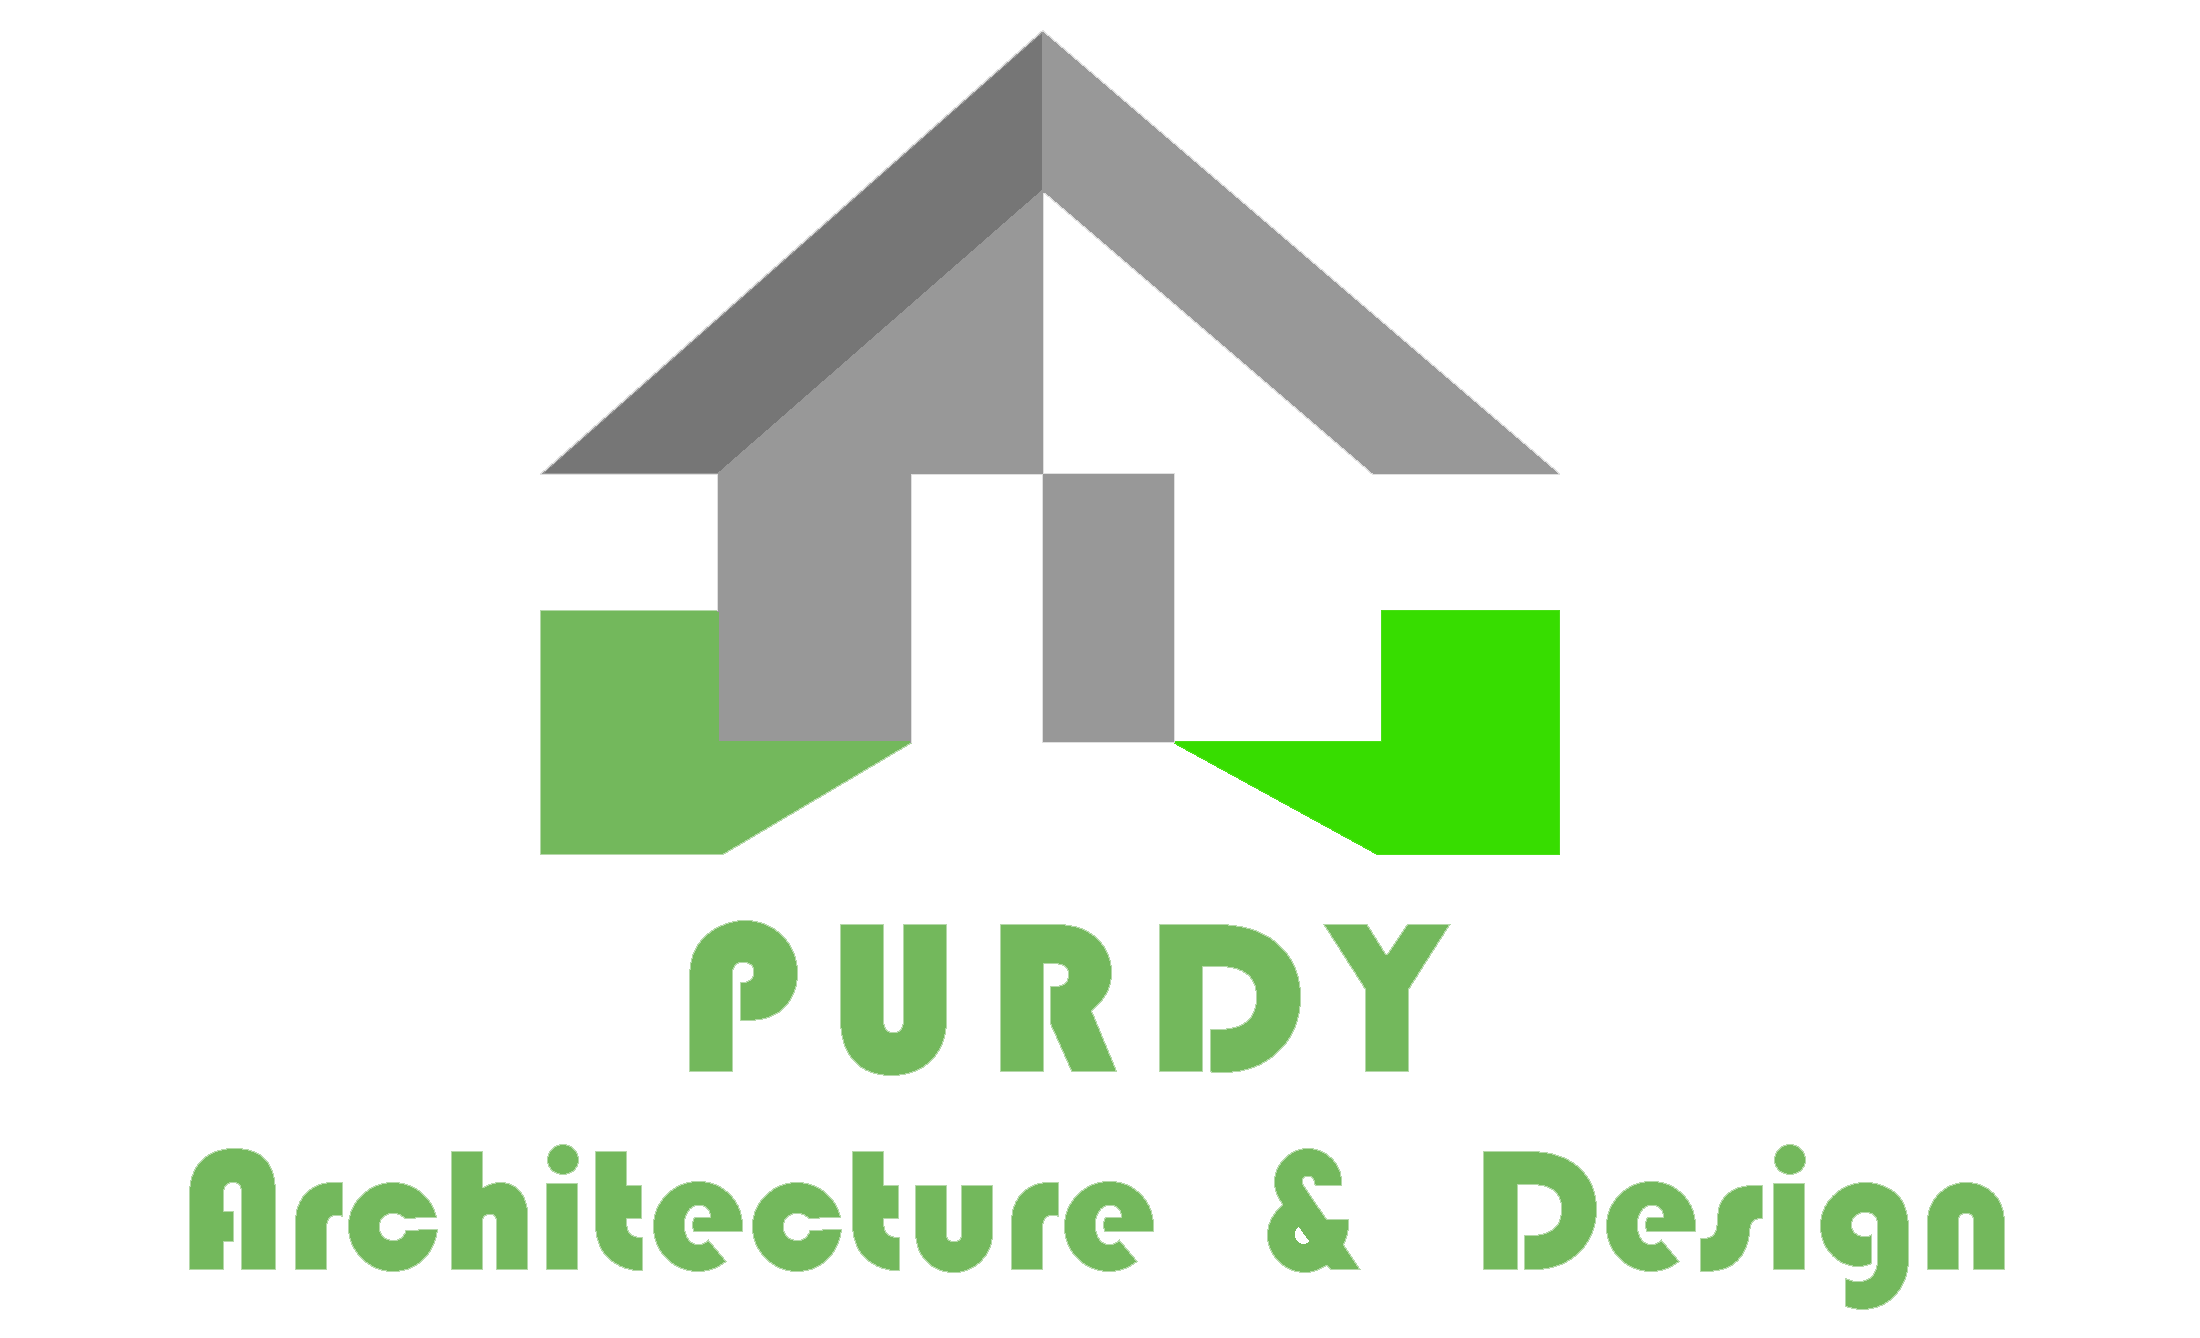 Miller Purdy Architects